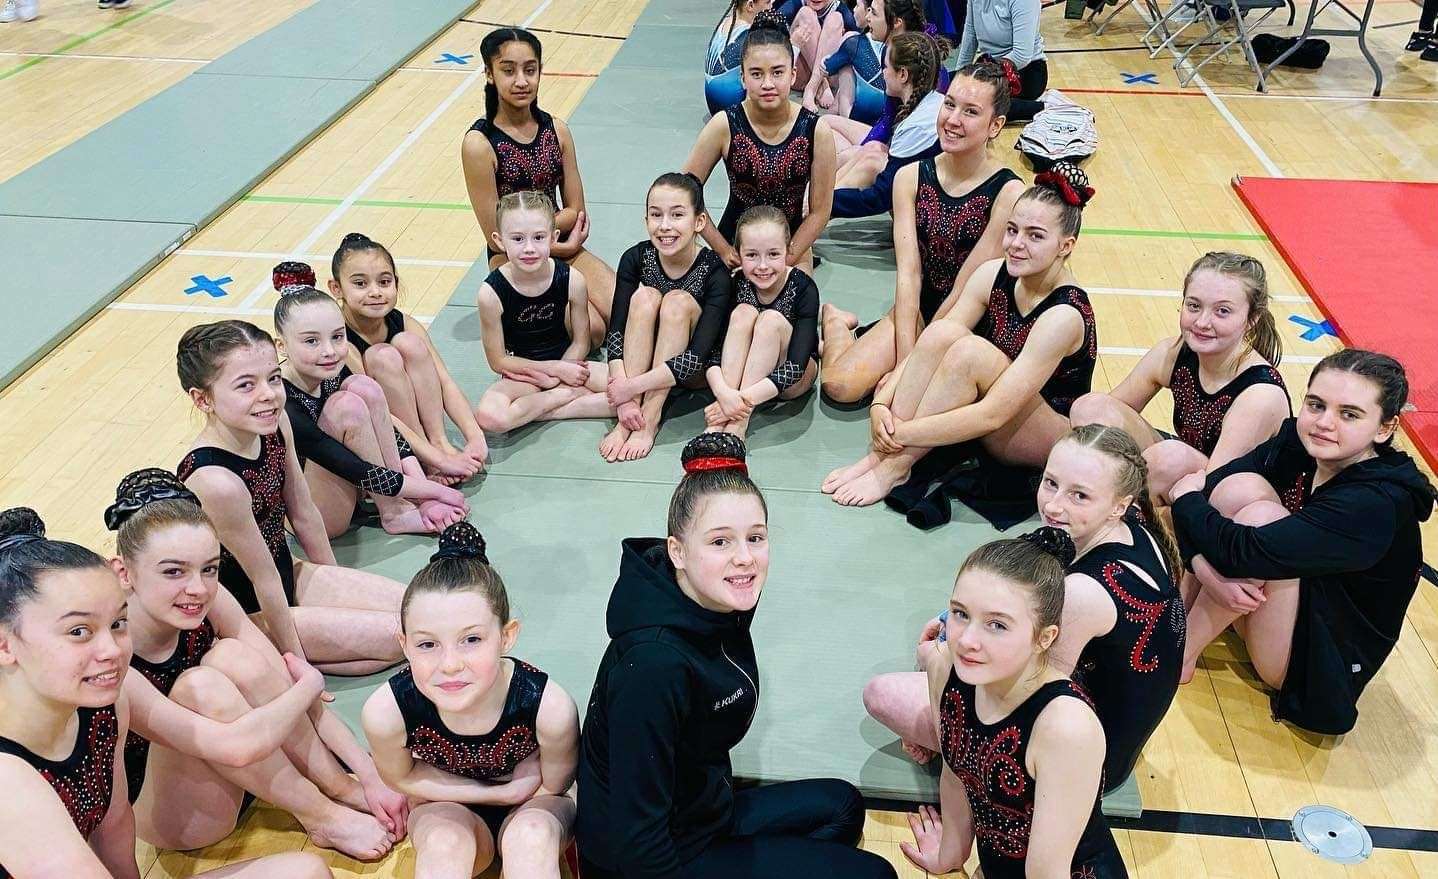 Garioch Gymnasts hosted and participated in the North of Scotland Floor and Vault competition in Inverurie.